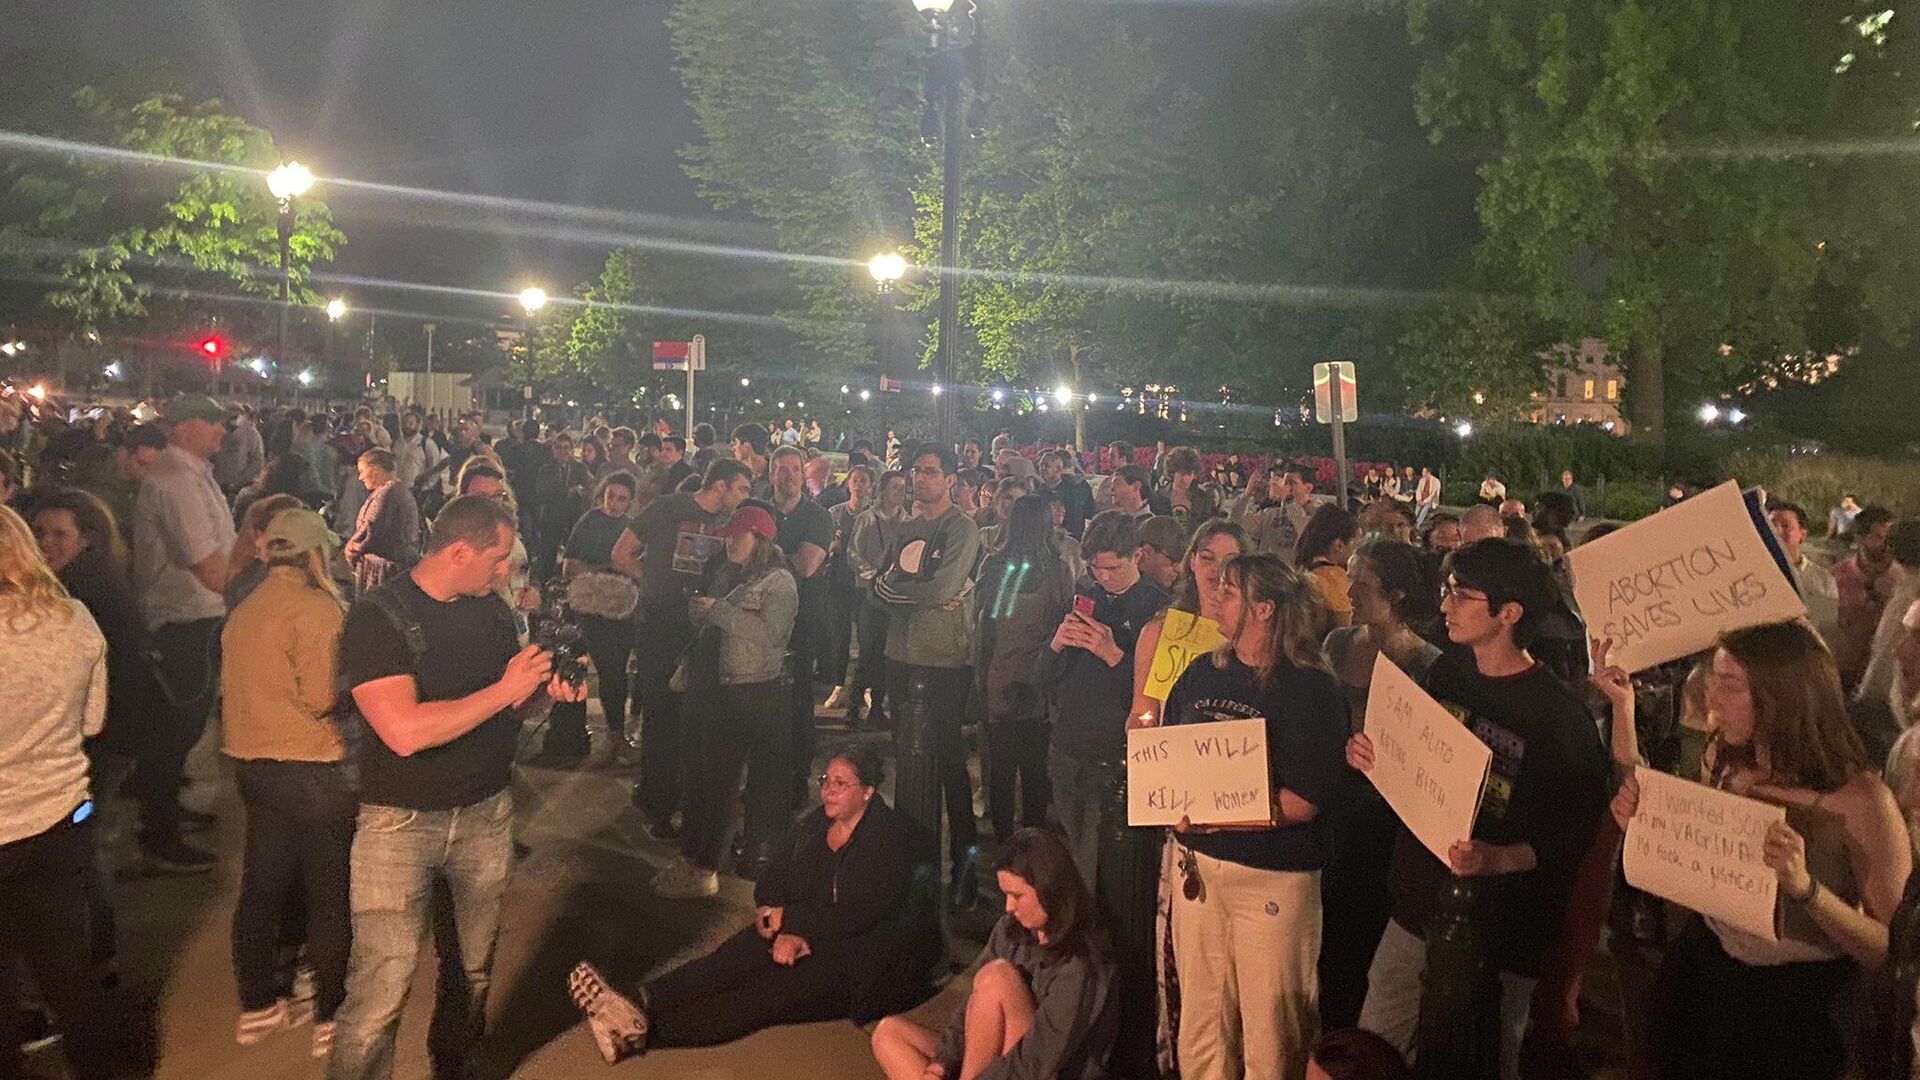 A social media photo of the protest rally outside the US Supreme Court on May 2, 2022. - Sputnik International, 1920, 03.05.2022